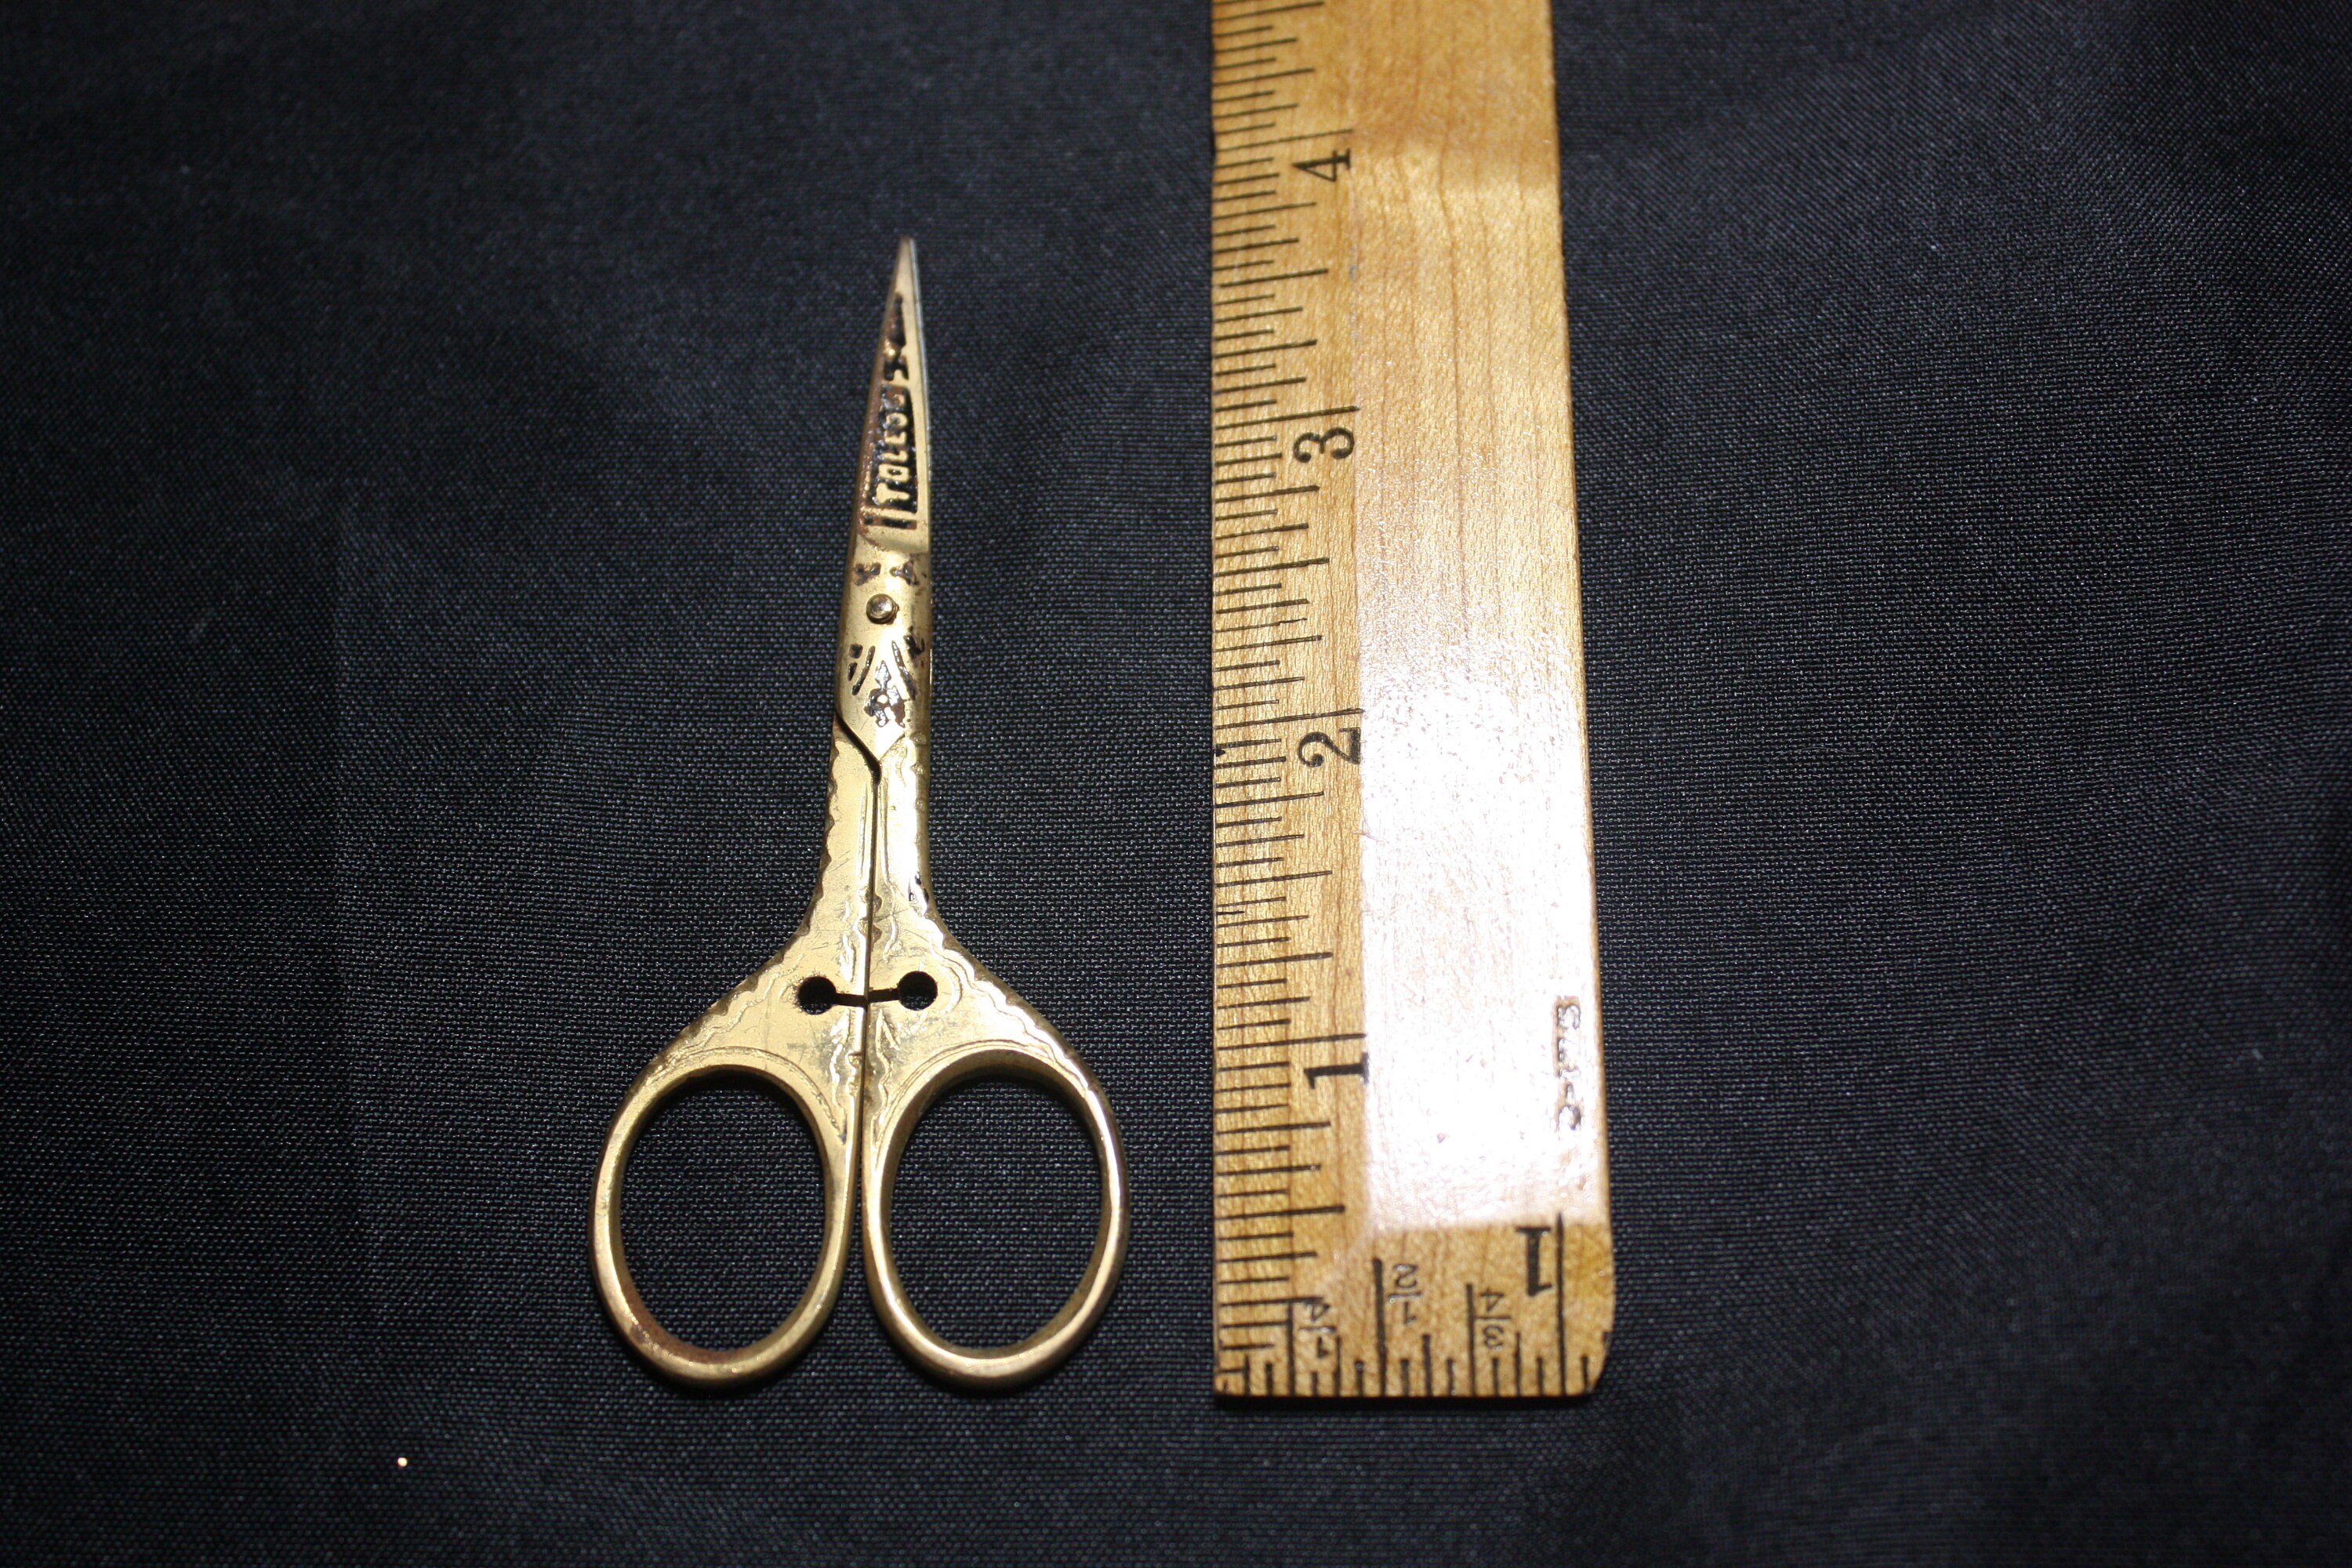 HC1308116 - Crazy Cut Scissors with Wooden Carousel